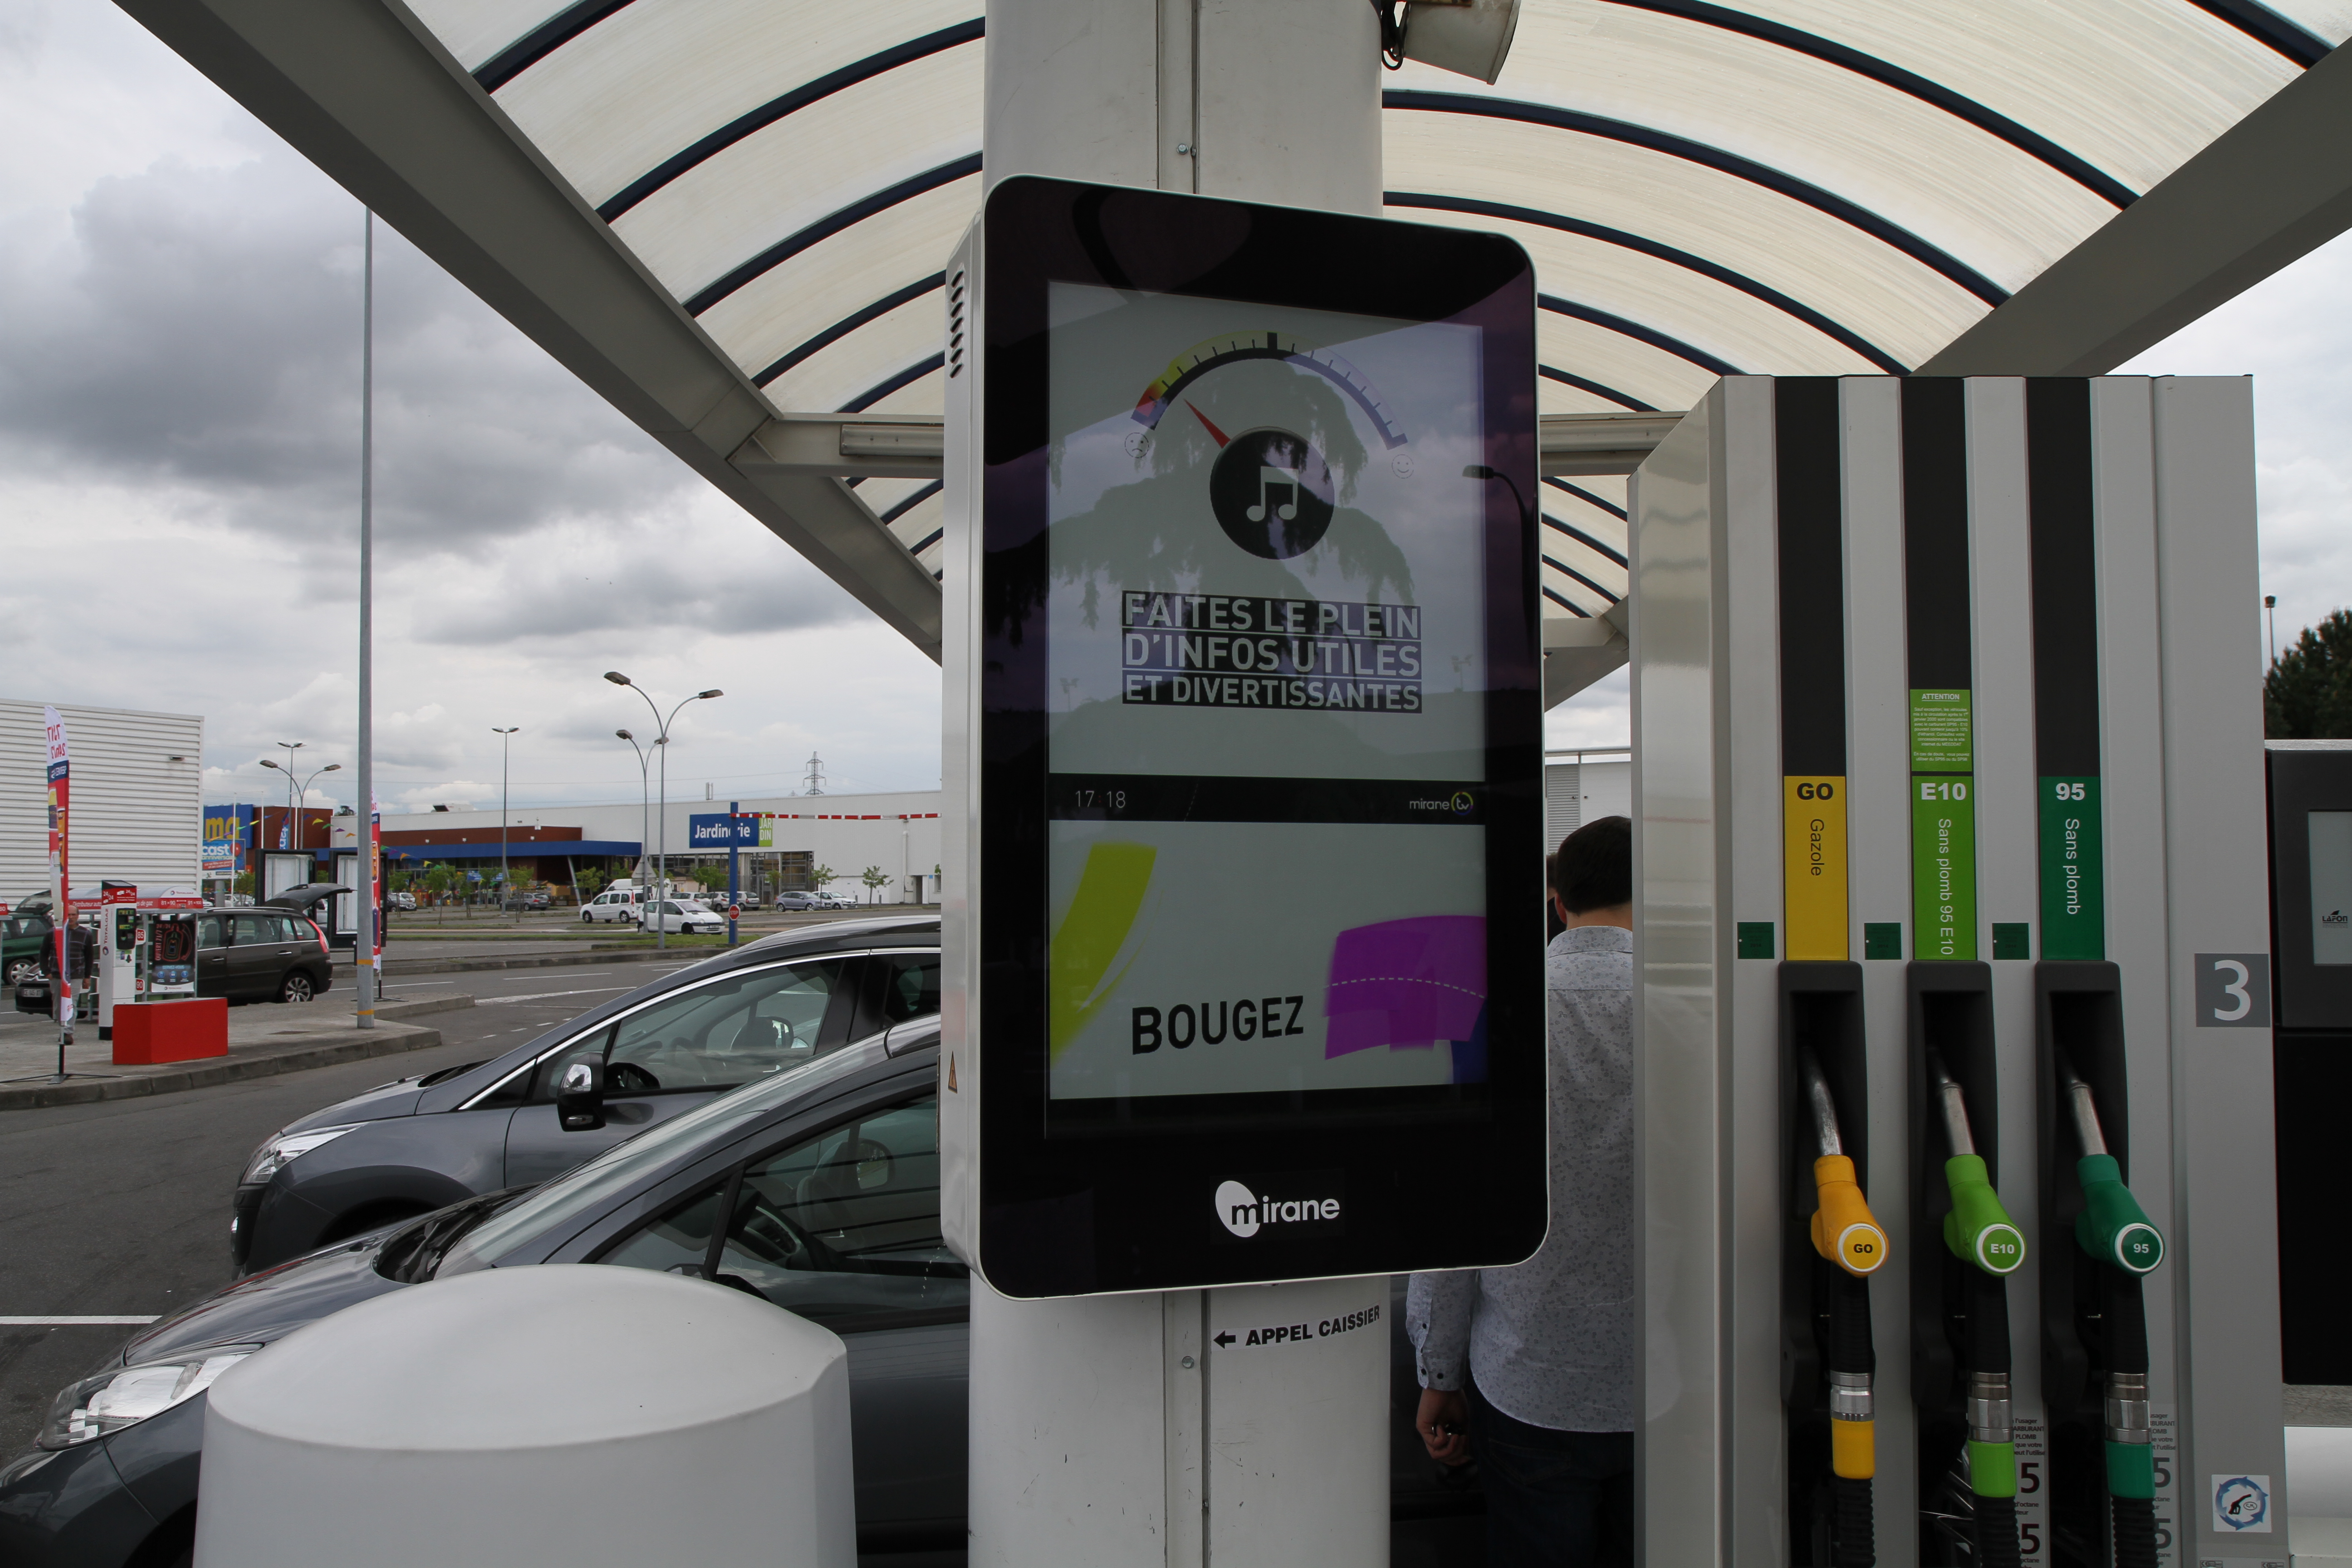  Outdoor LCD AD Monitor  Applied to the  French Gas Station 